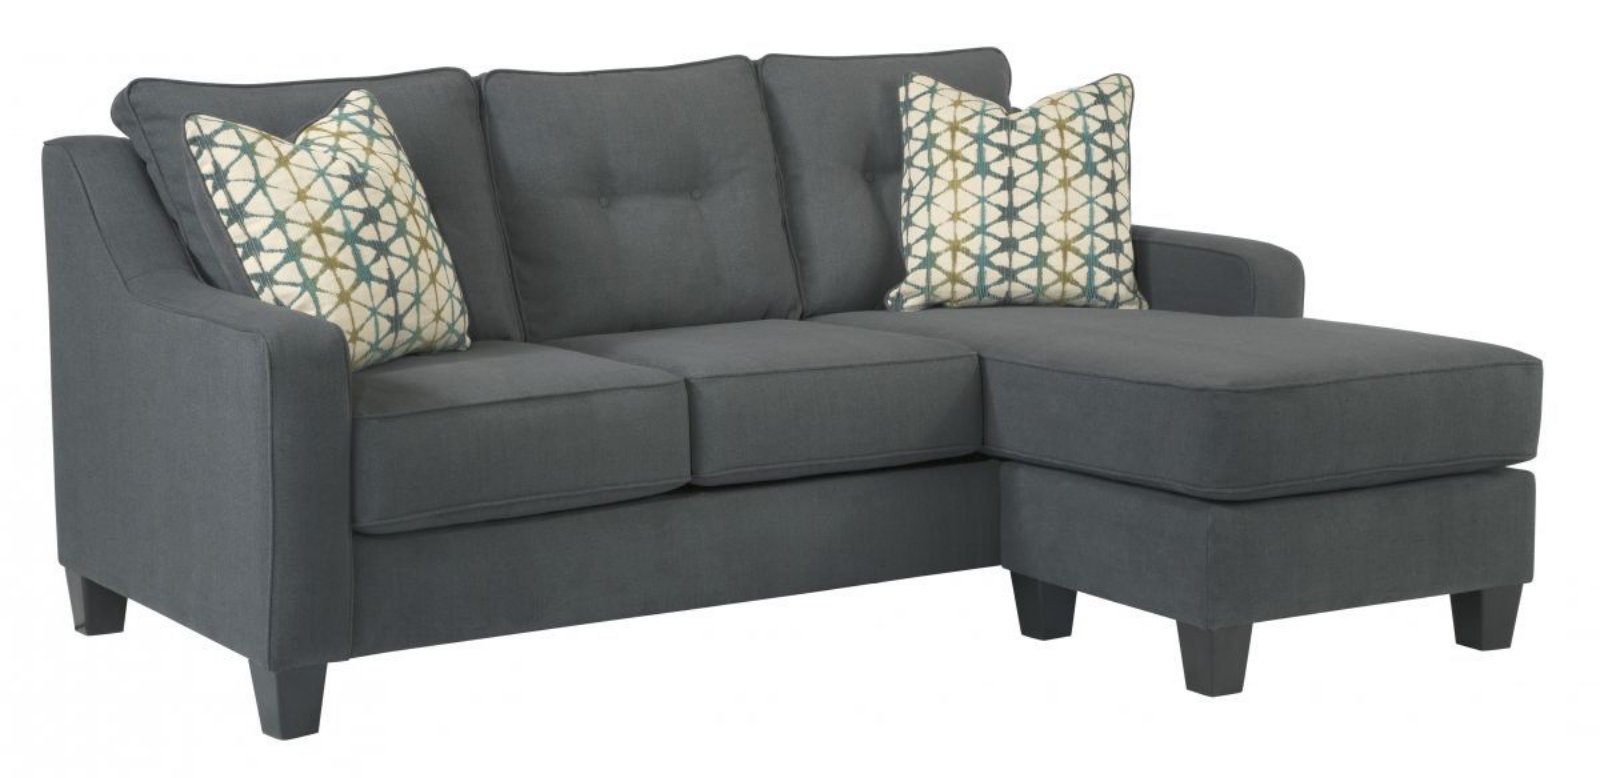 Picture of Shayla Sofa Chaise